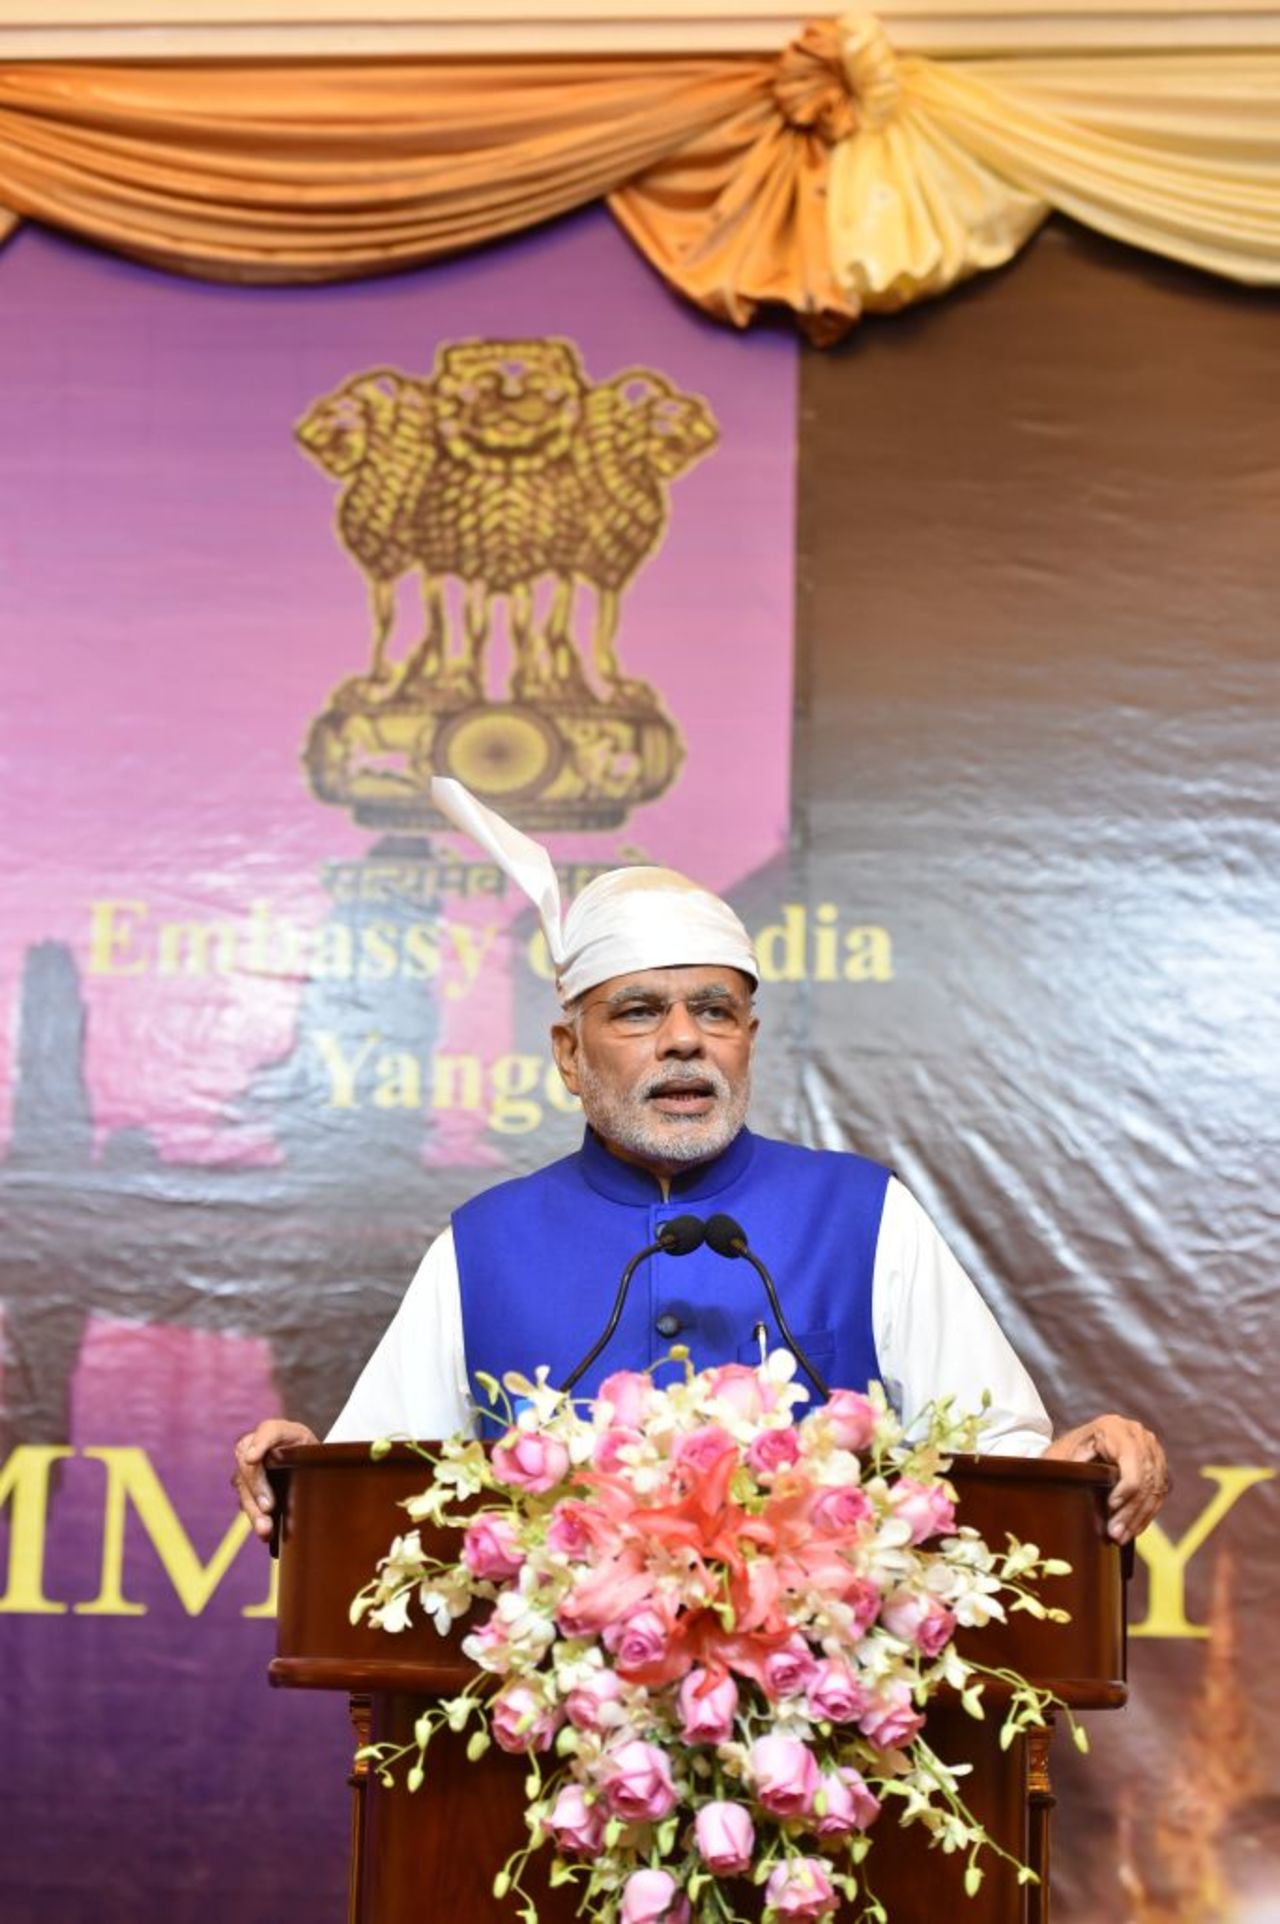 Even in foreign countries, the Indian leader is also seen adorning different hats. Here, Modi wears a traditional Gaung Baung, also known as a "head wrap" in Burmese. This headwear is worn as a part of traditional ceremony attire in Myanmar and represents a sign of rank and respect. 